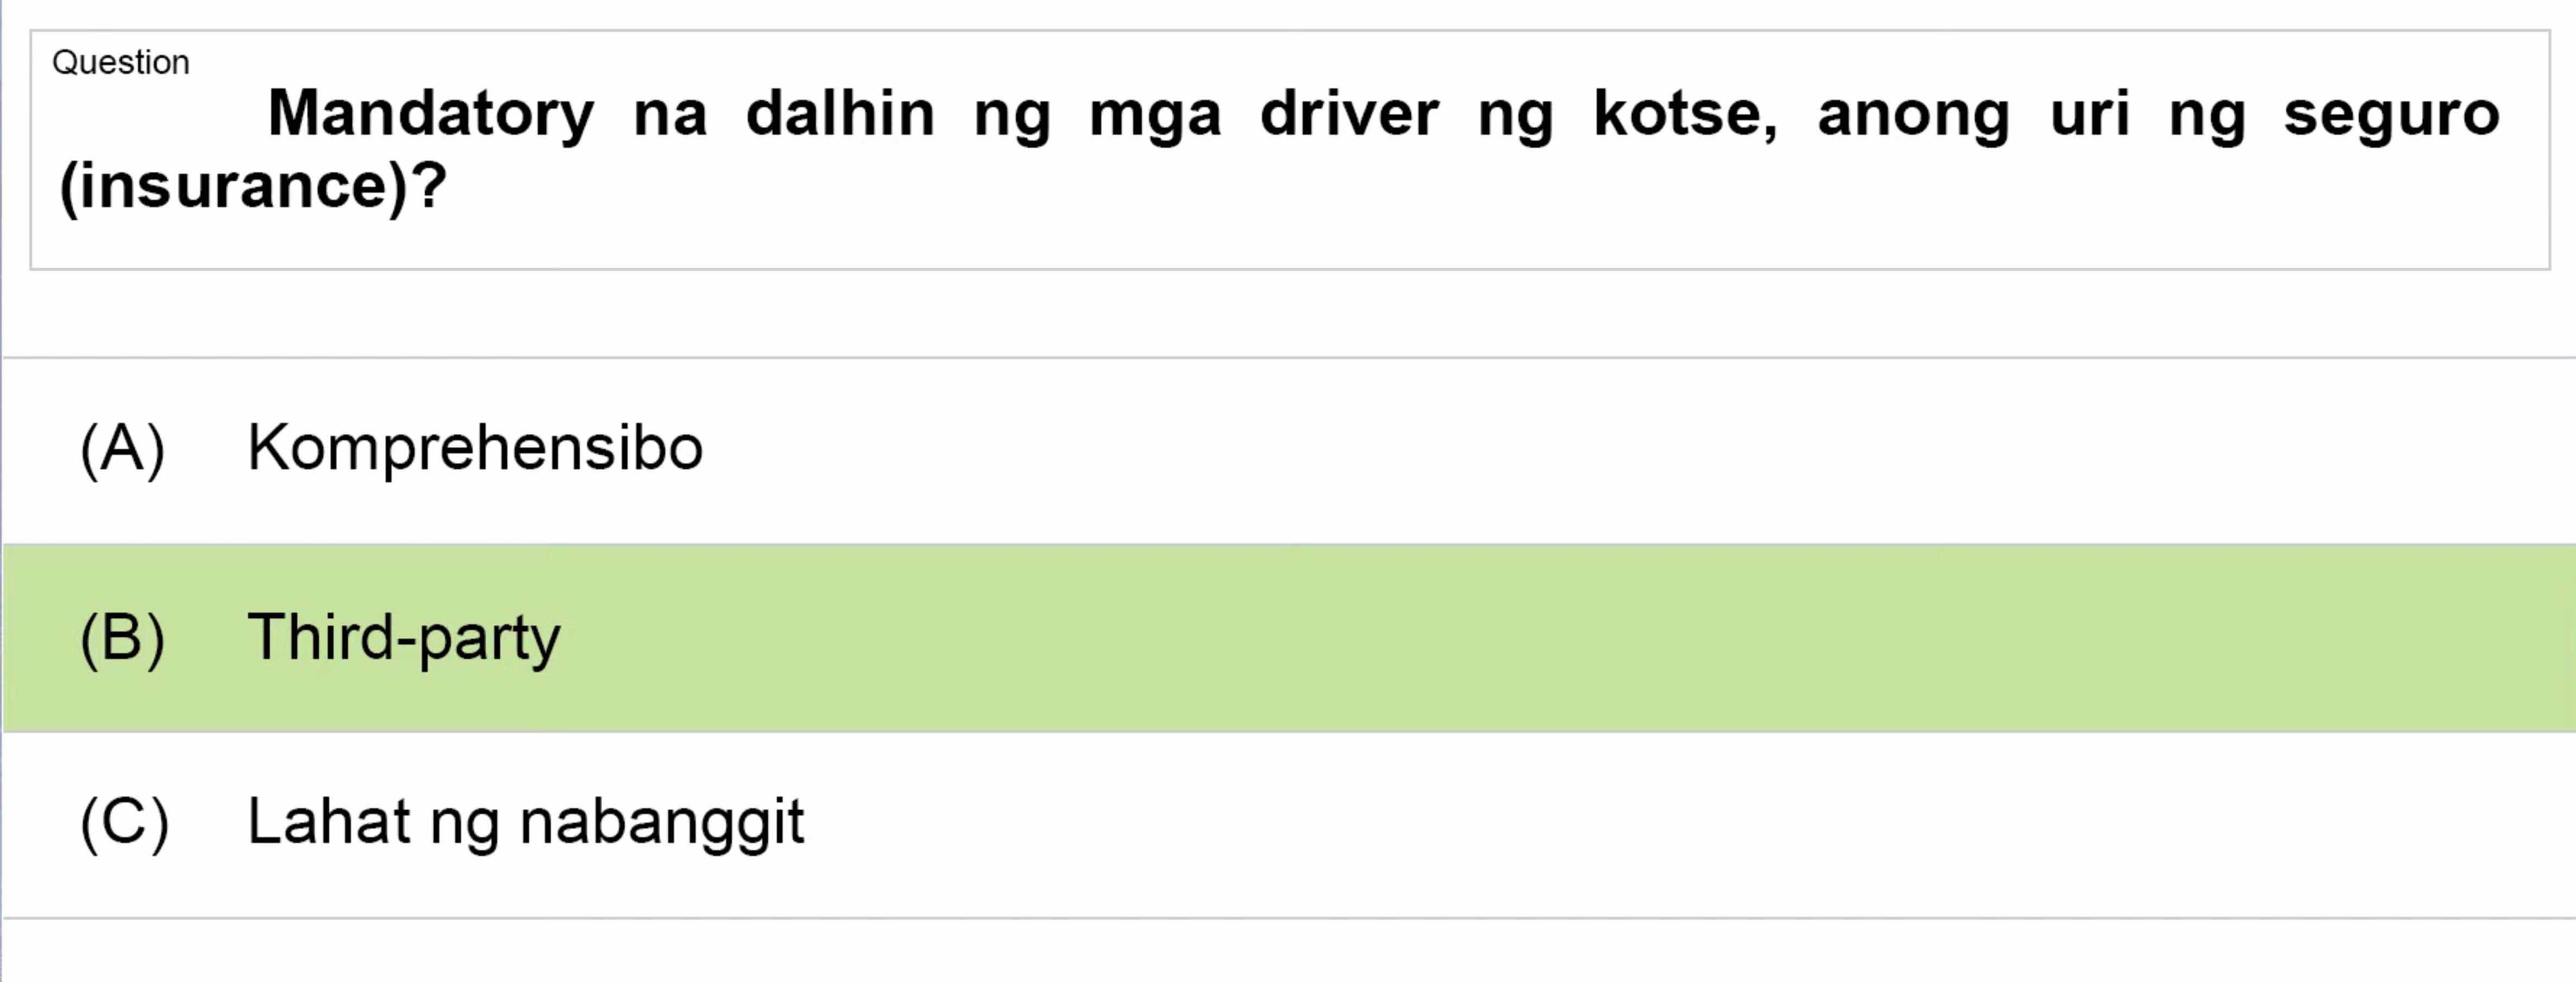 LTO Tagalog non professional exam reviewer light vehicle 3 (11)